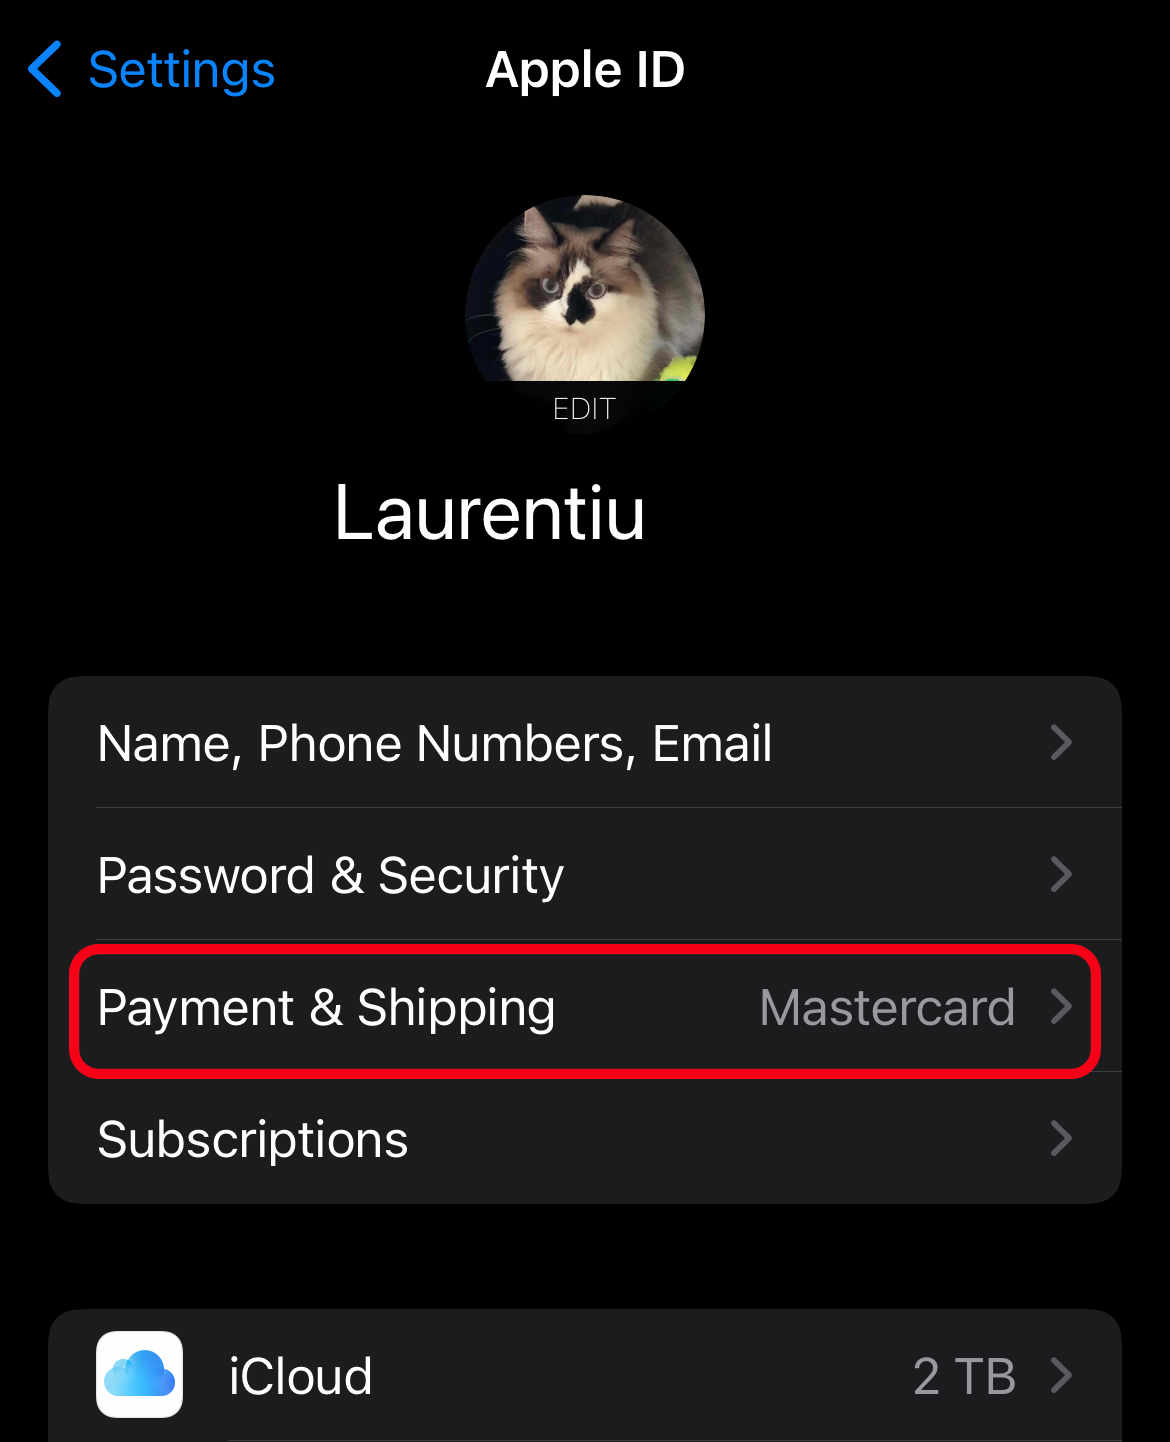 Payment & Shipping